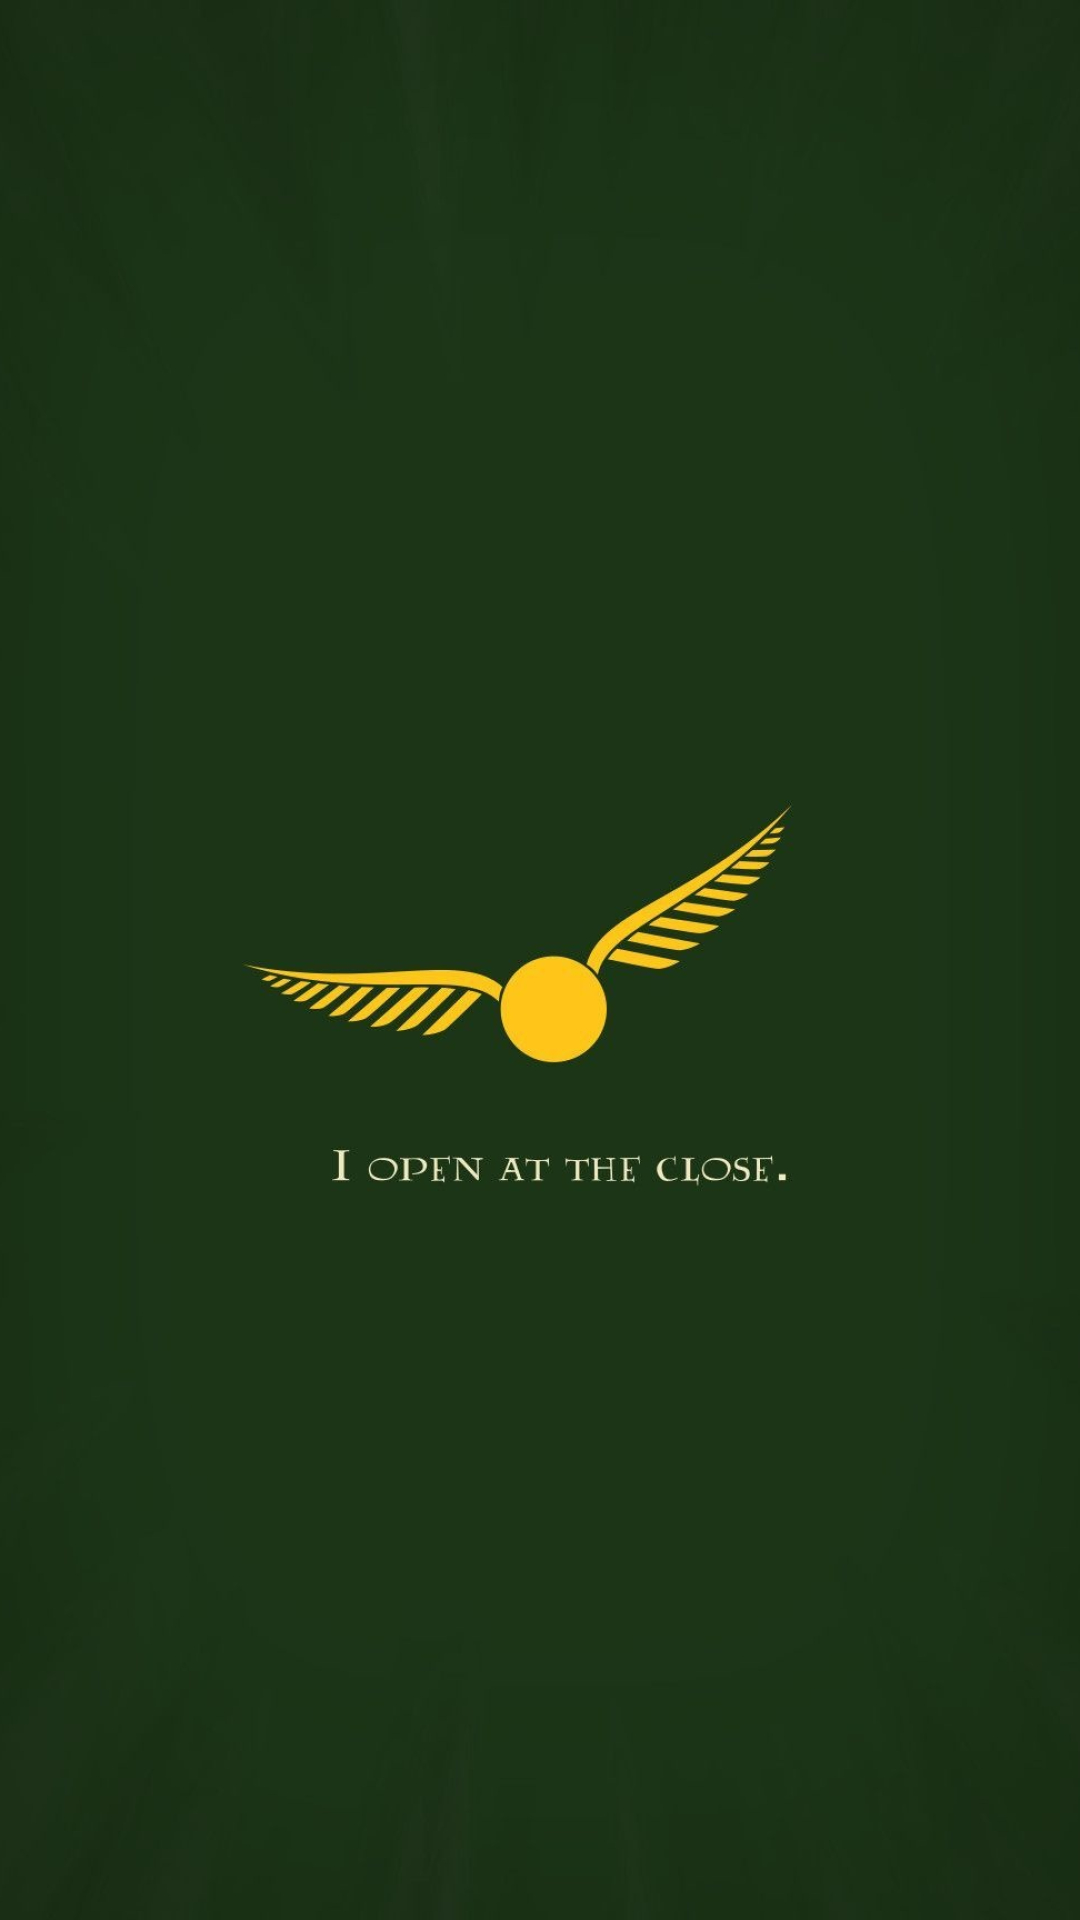 Slytherin Quidditch team, Seeker wallpapers, Cunning tactics, House unity, 1080x1920 Full HD Phone